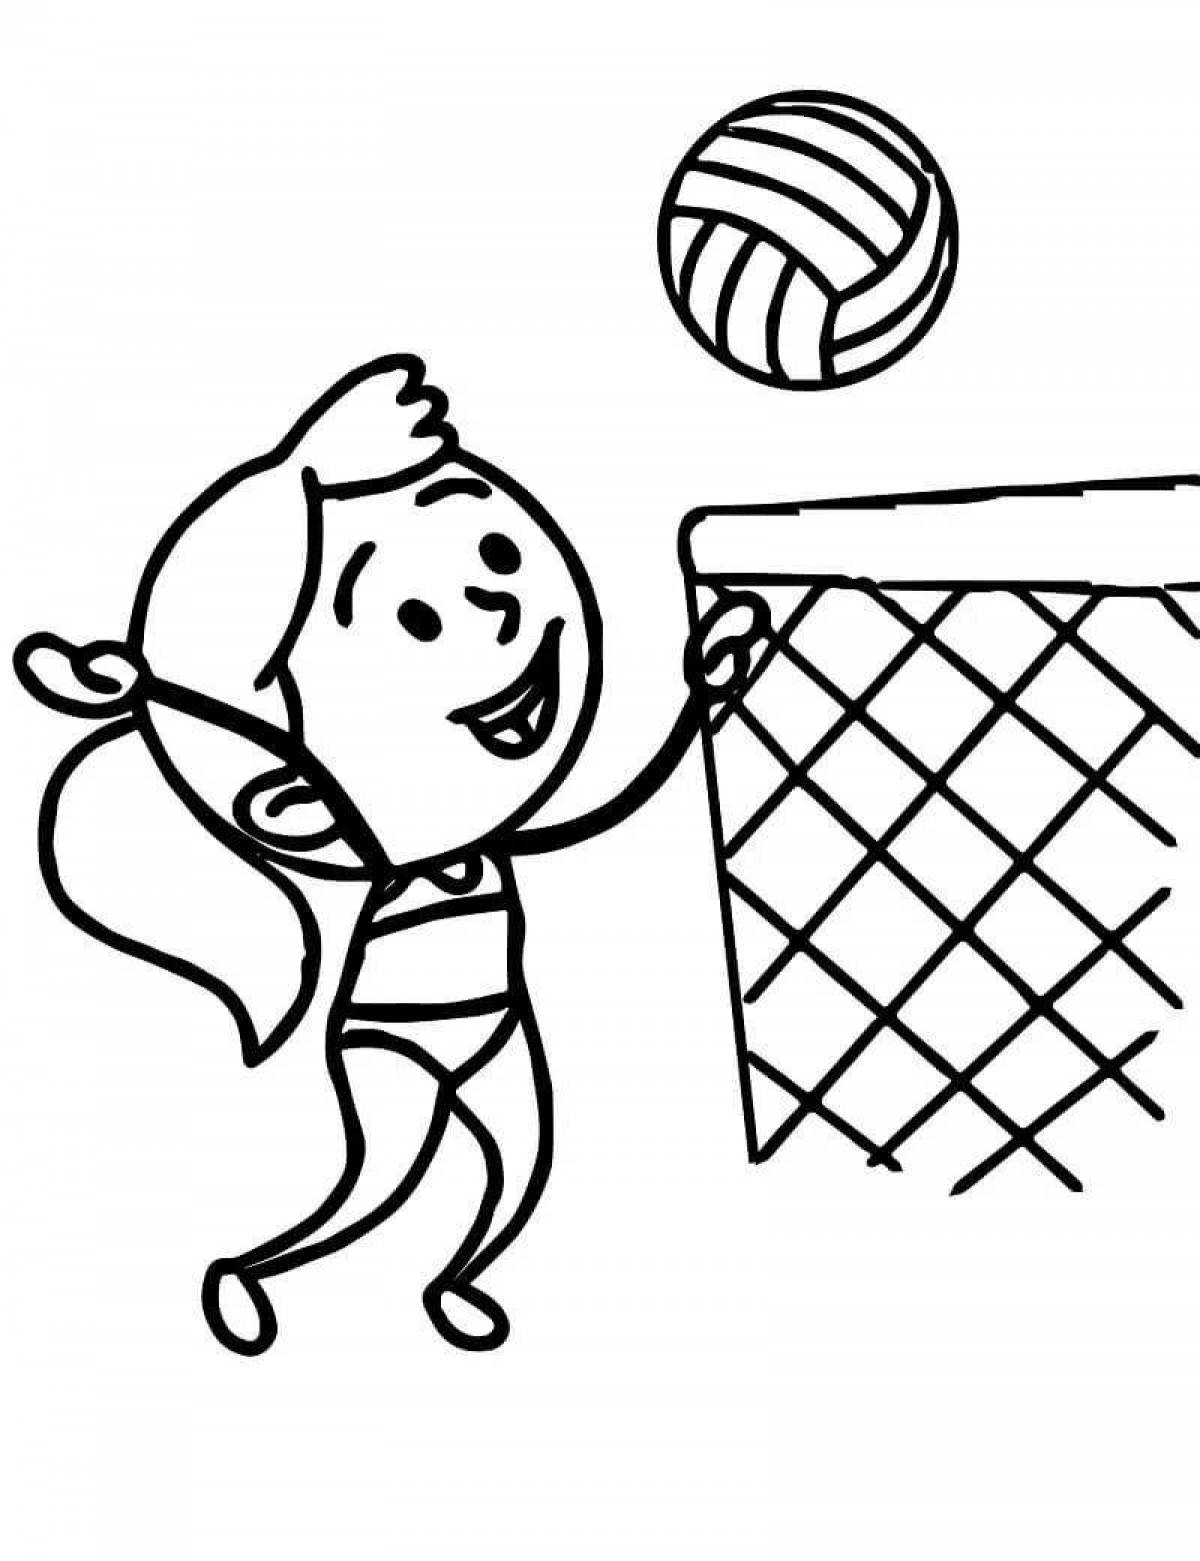 Colourful volleyball coloring book for boys